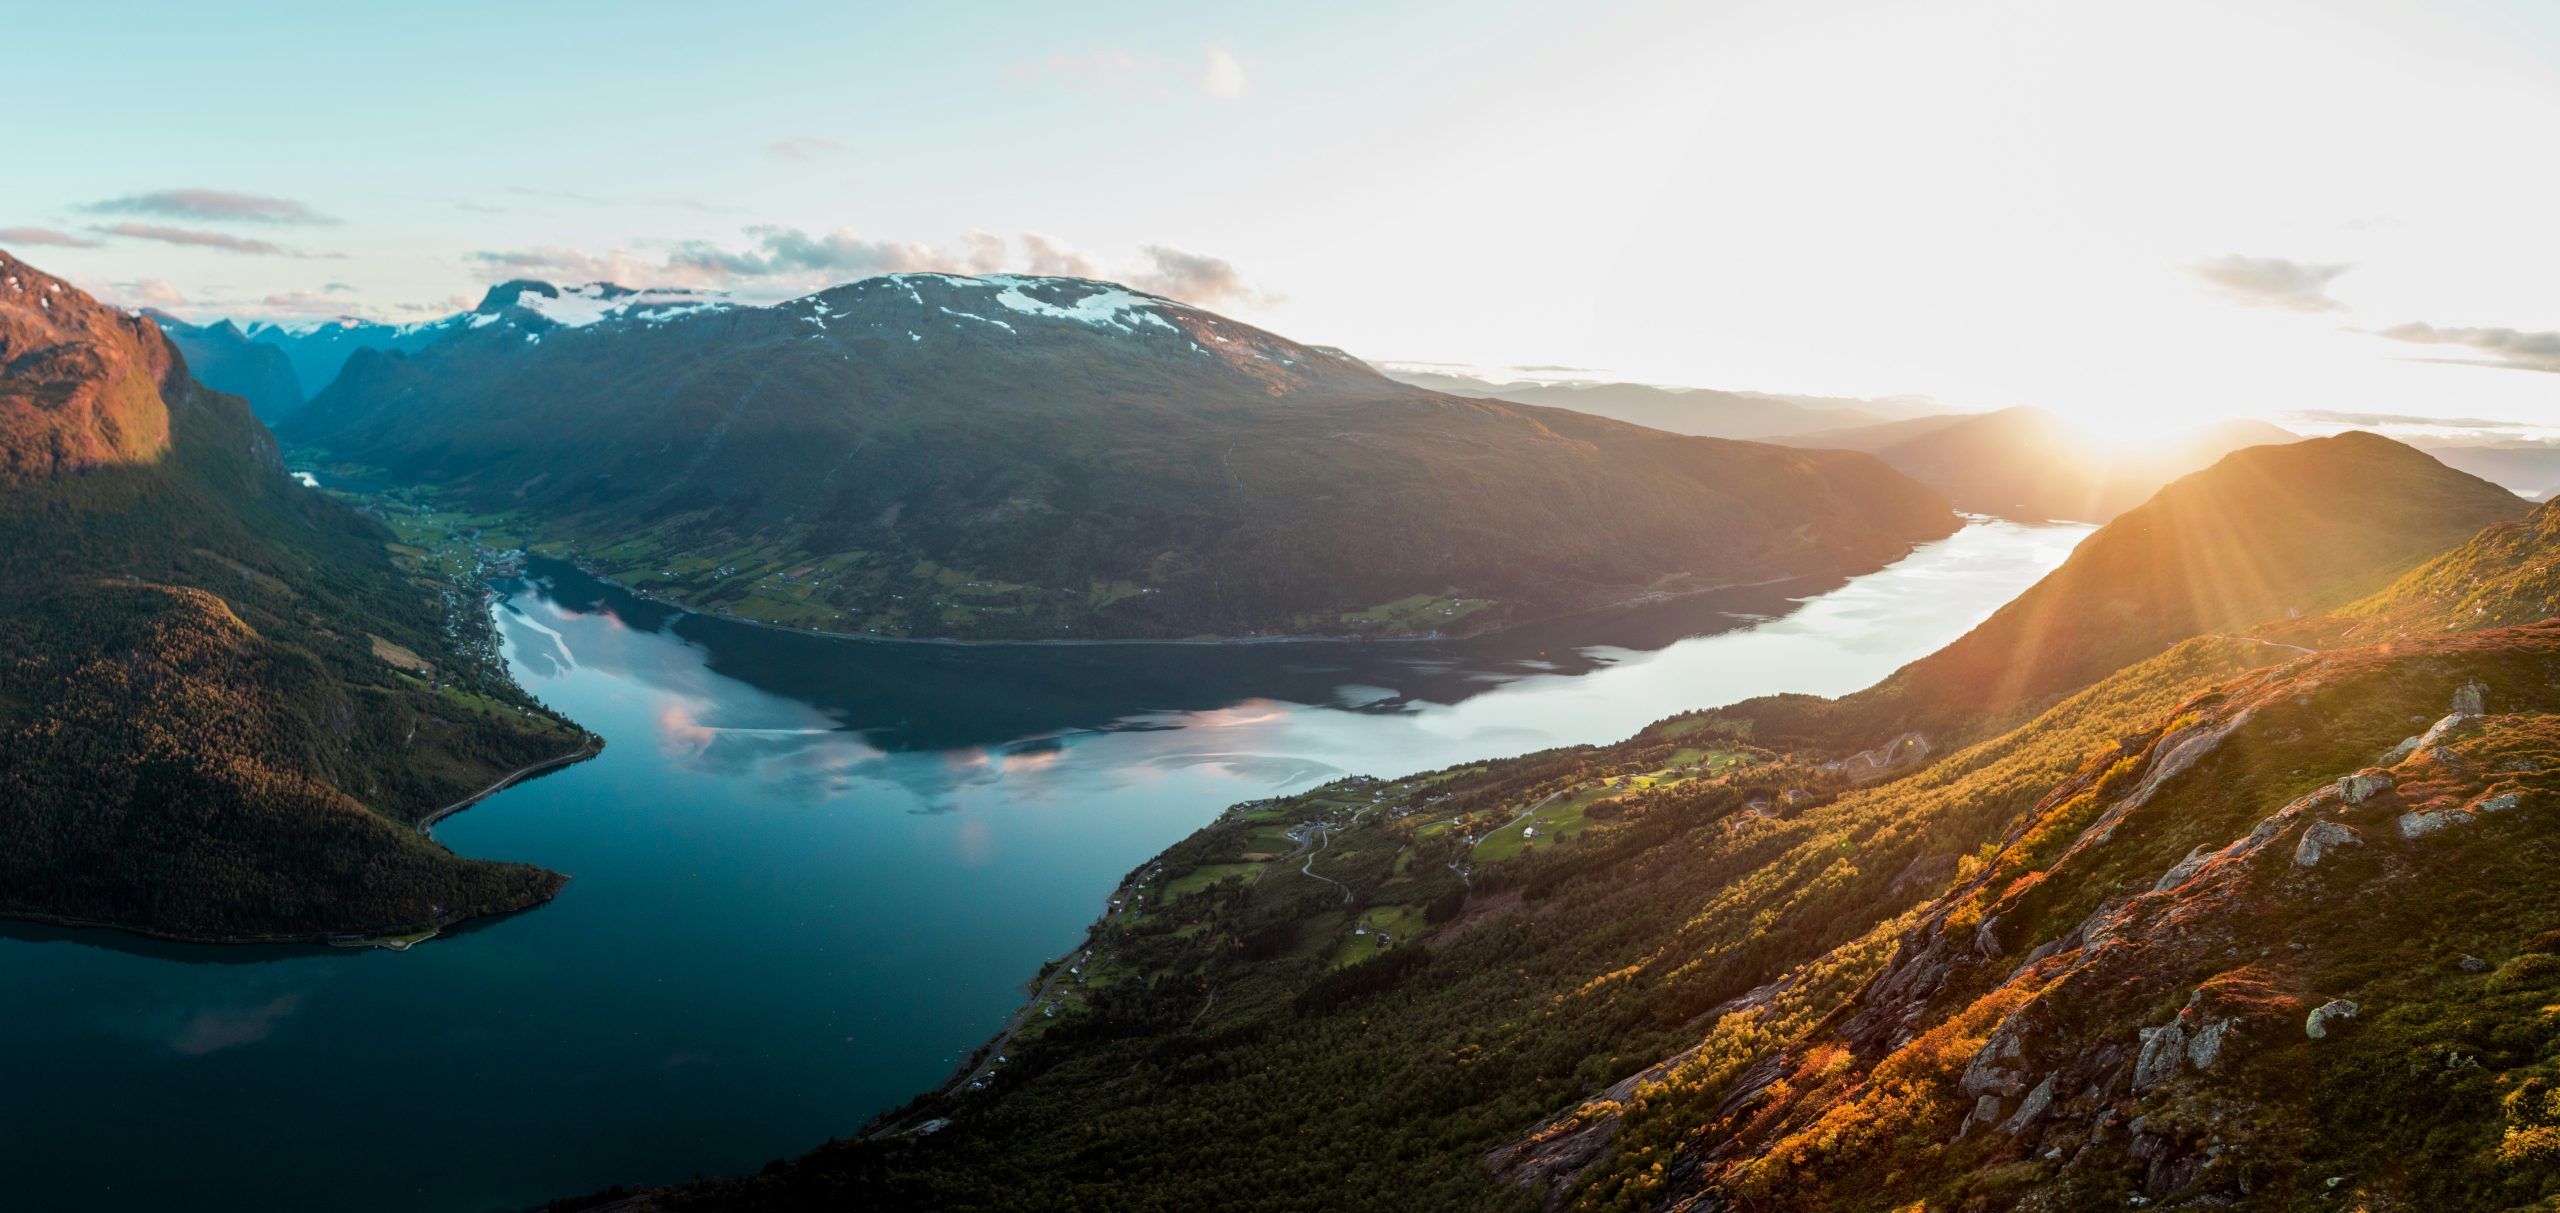 discover the stunning fjords of norway and immerse yourself in the breathtaking natural beauty of the country's coastal landscapes.